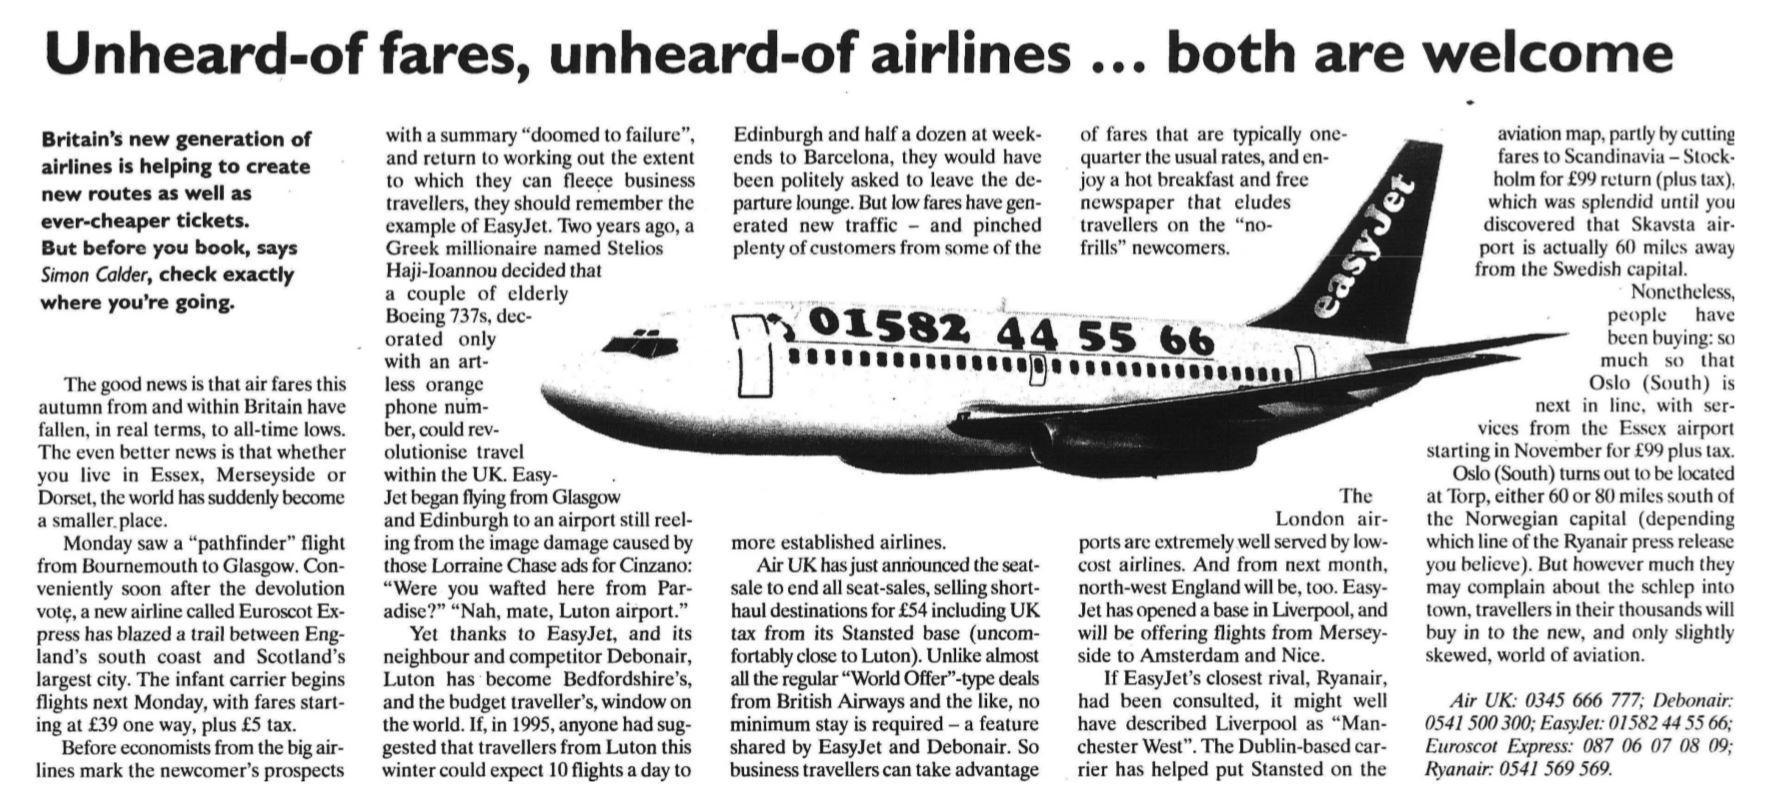 1997: easy does it with a story about the then upstart airline easyJet